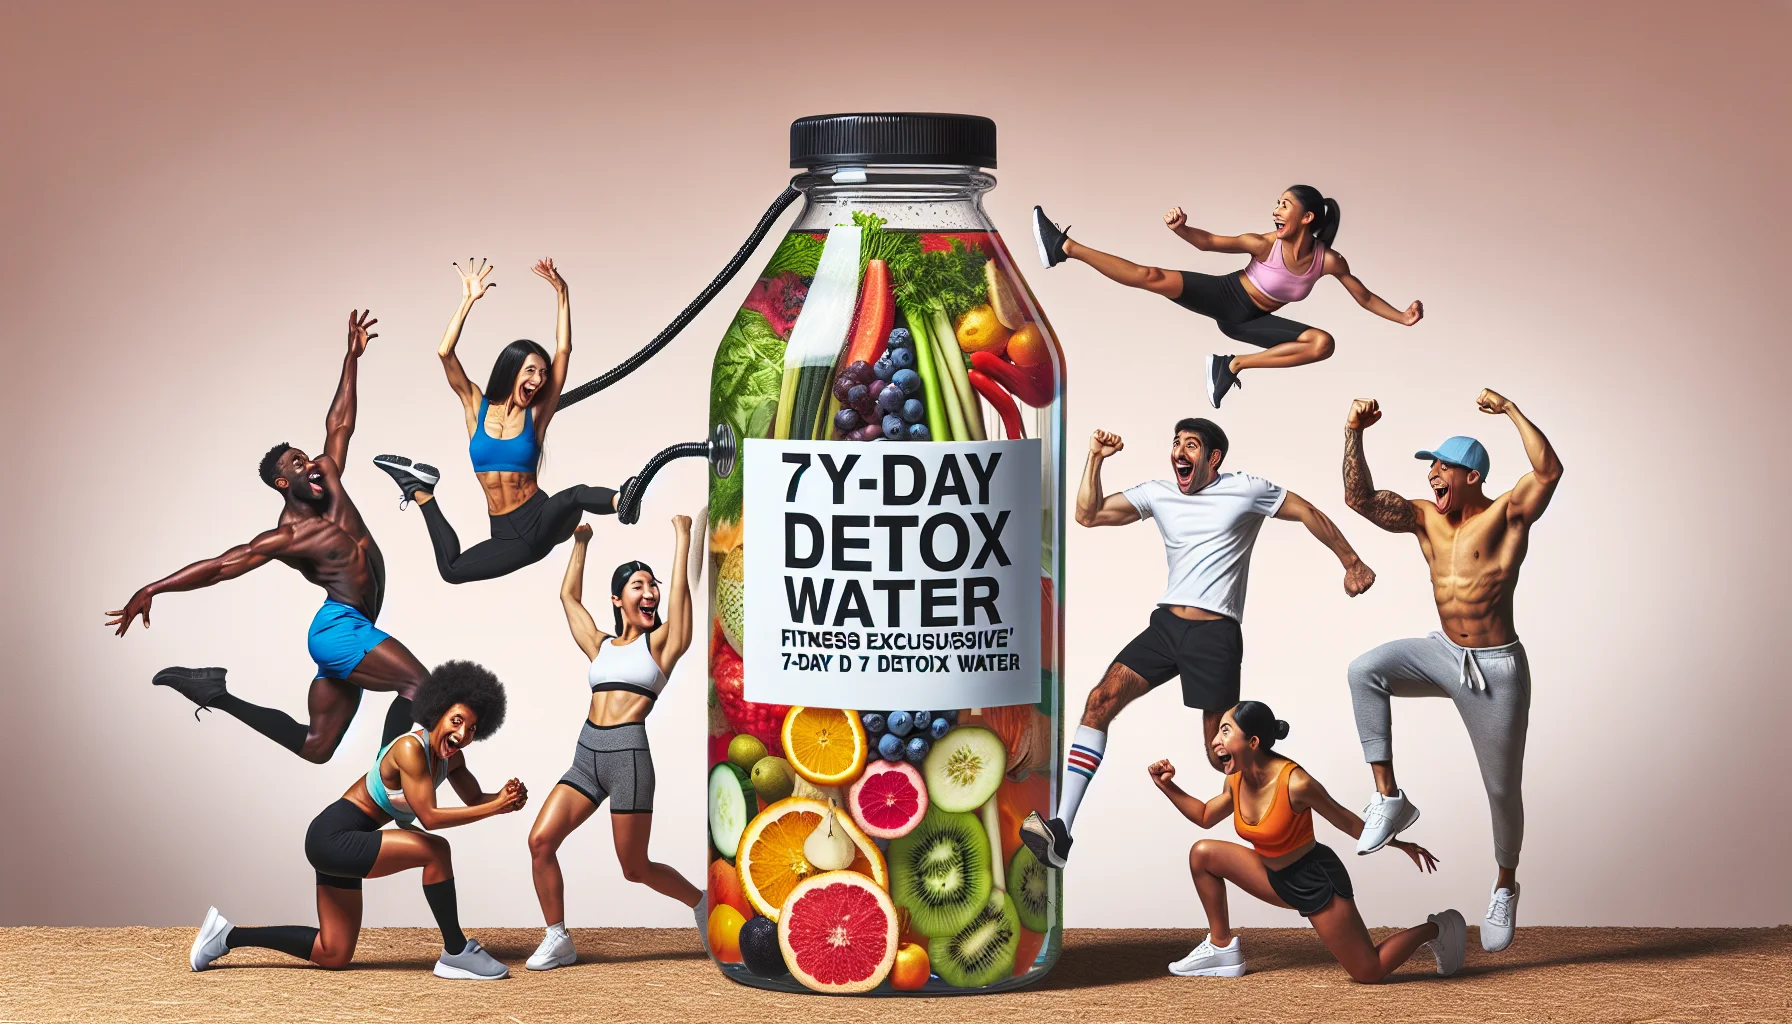 Create a humorous image featuring an enticing scenario for fitness enthusiasts. In the center of the scene, you see a 7-day detox water in a glass carafe filled with colorful fruits and vegetables, infused and looking vibrant. Include a label on the carafe saying 'Fitness Enthusiasts' Exclusive 7-Day Detox Water'. Around the carafe, illustrate people of different descents and genders - a Black man, a Hispanic woman, a Middle-Eastern woman, a Caucasian man - all in workout clothes, in funny exaggerated exercise poses, joyously trying to reach the carafe like it's their ultimate prize.